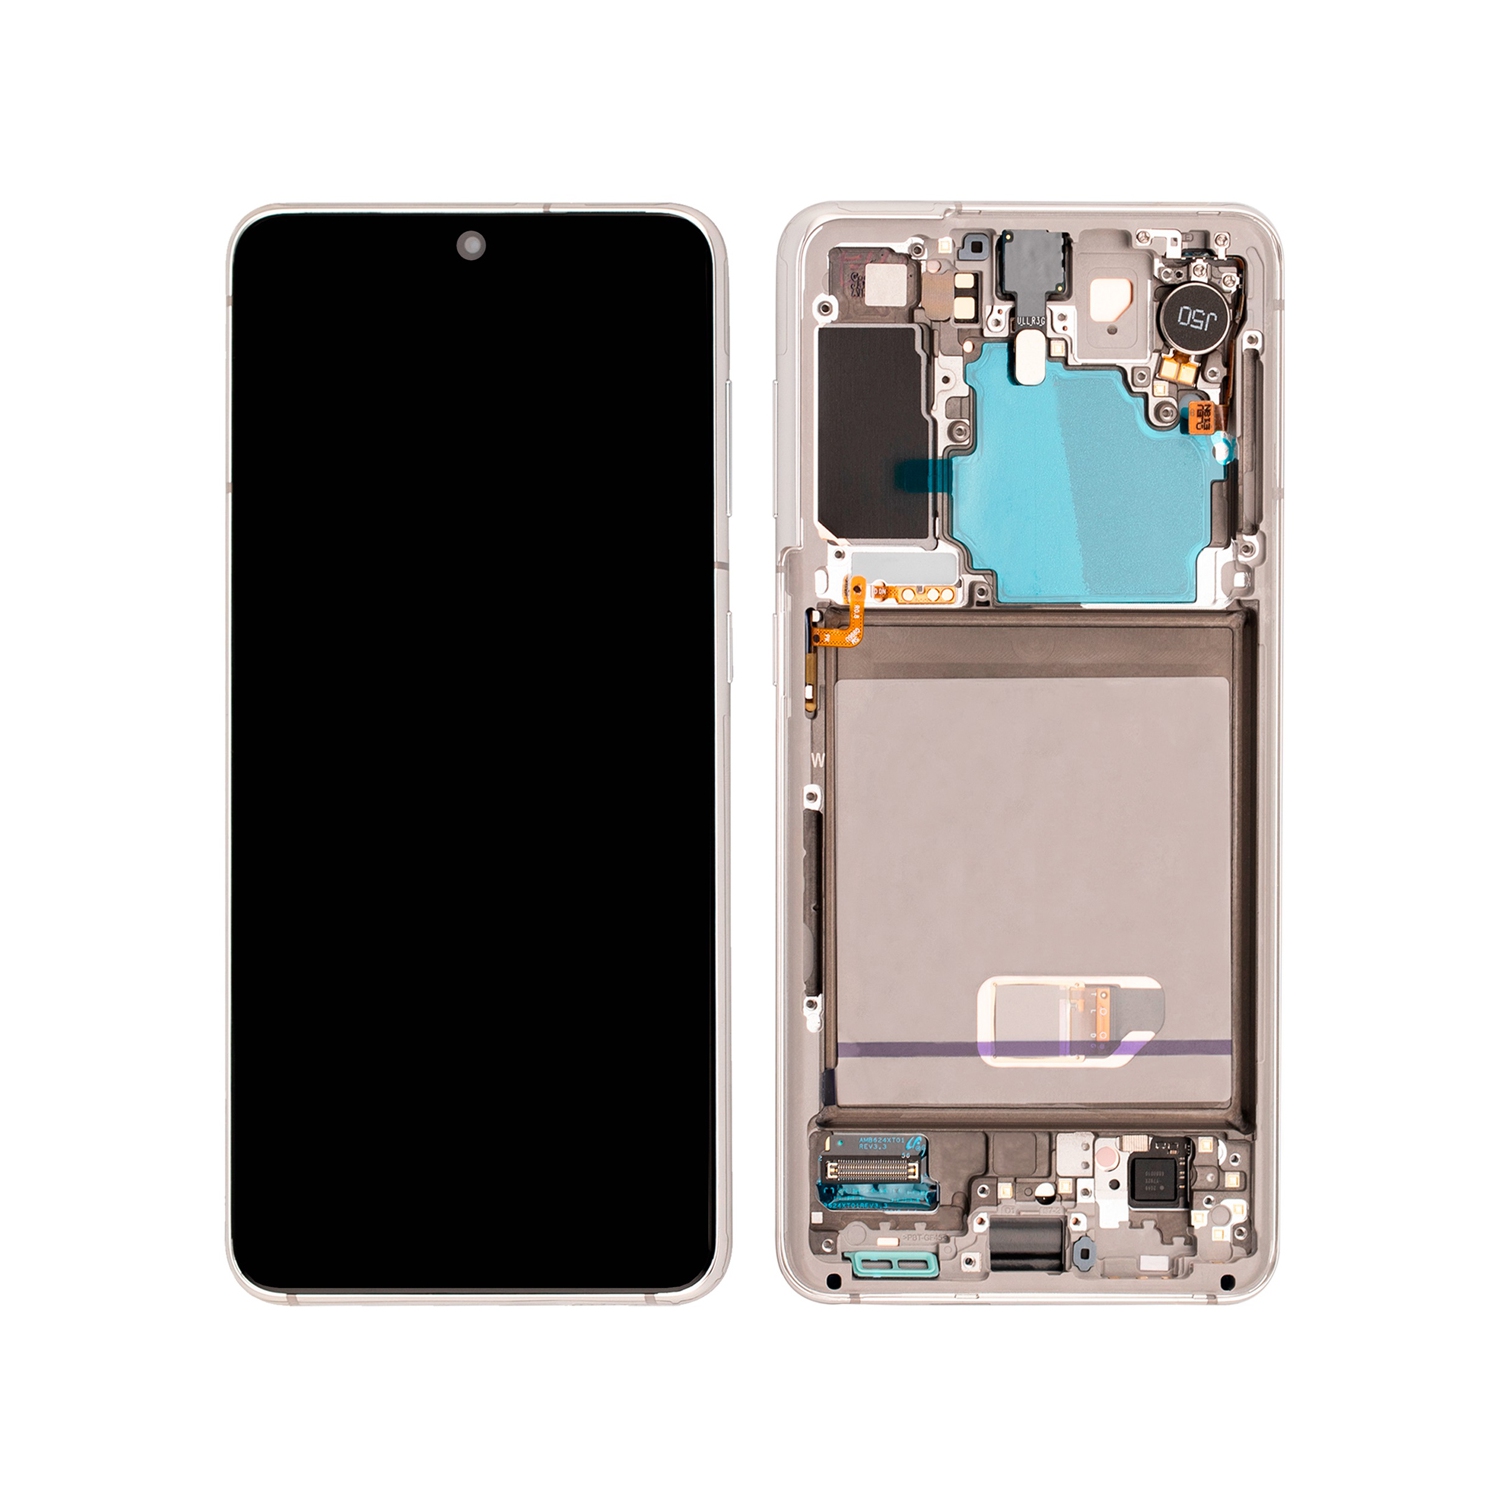 LCD Display Touch Screen Digitizer Assembly + Frame For Samsung Galaxy S21 5G (SM-G991W) - Phantom White (Refurbished)